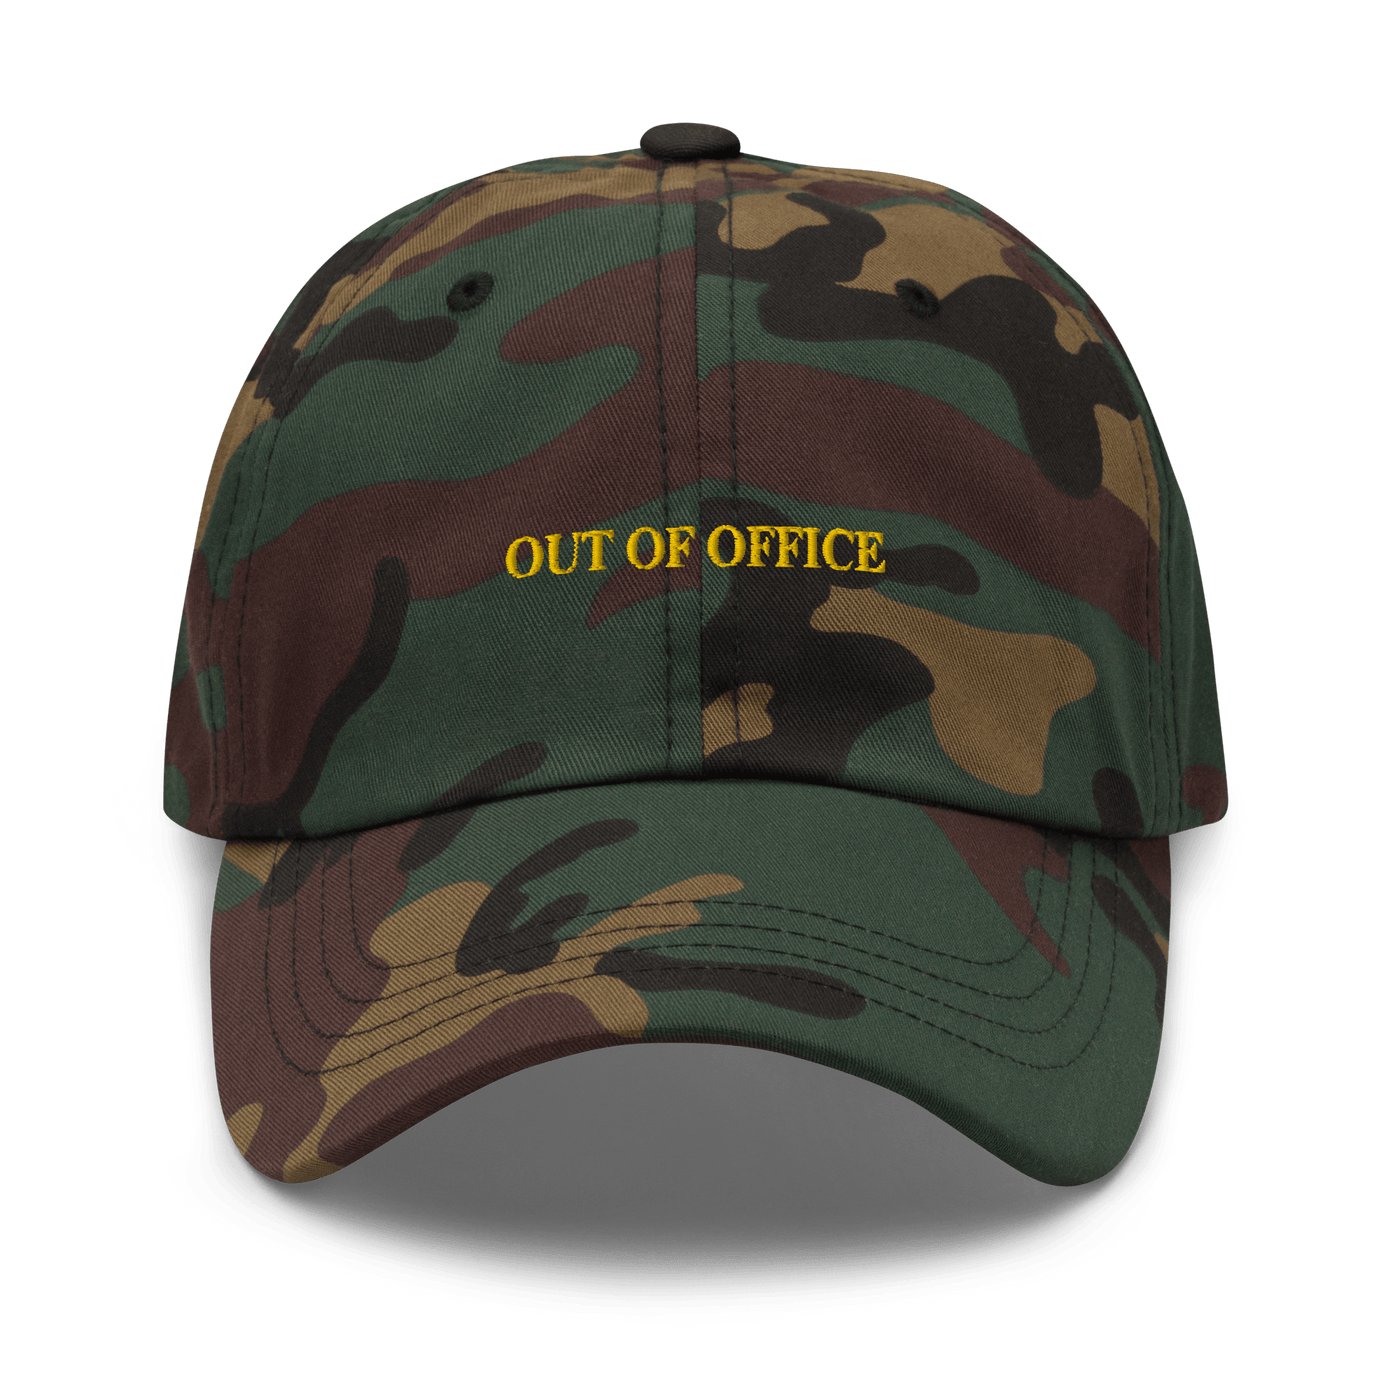 OUT OF OFFICE Dad hat - Green Camo - - Just Another Cap Store